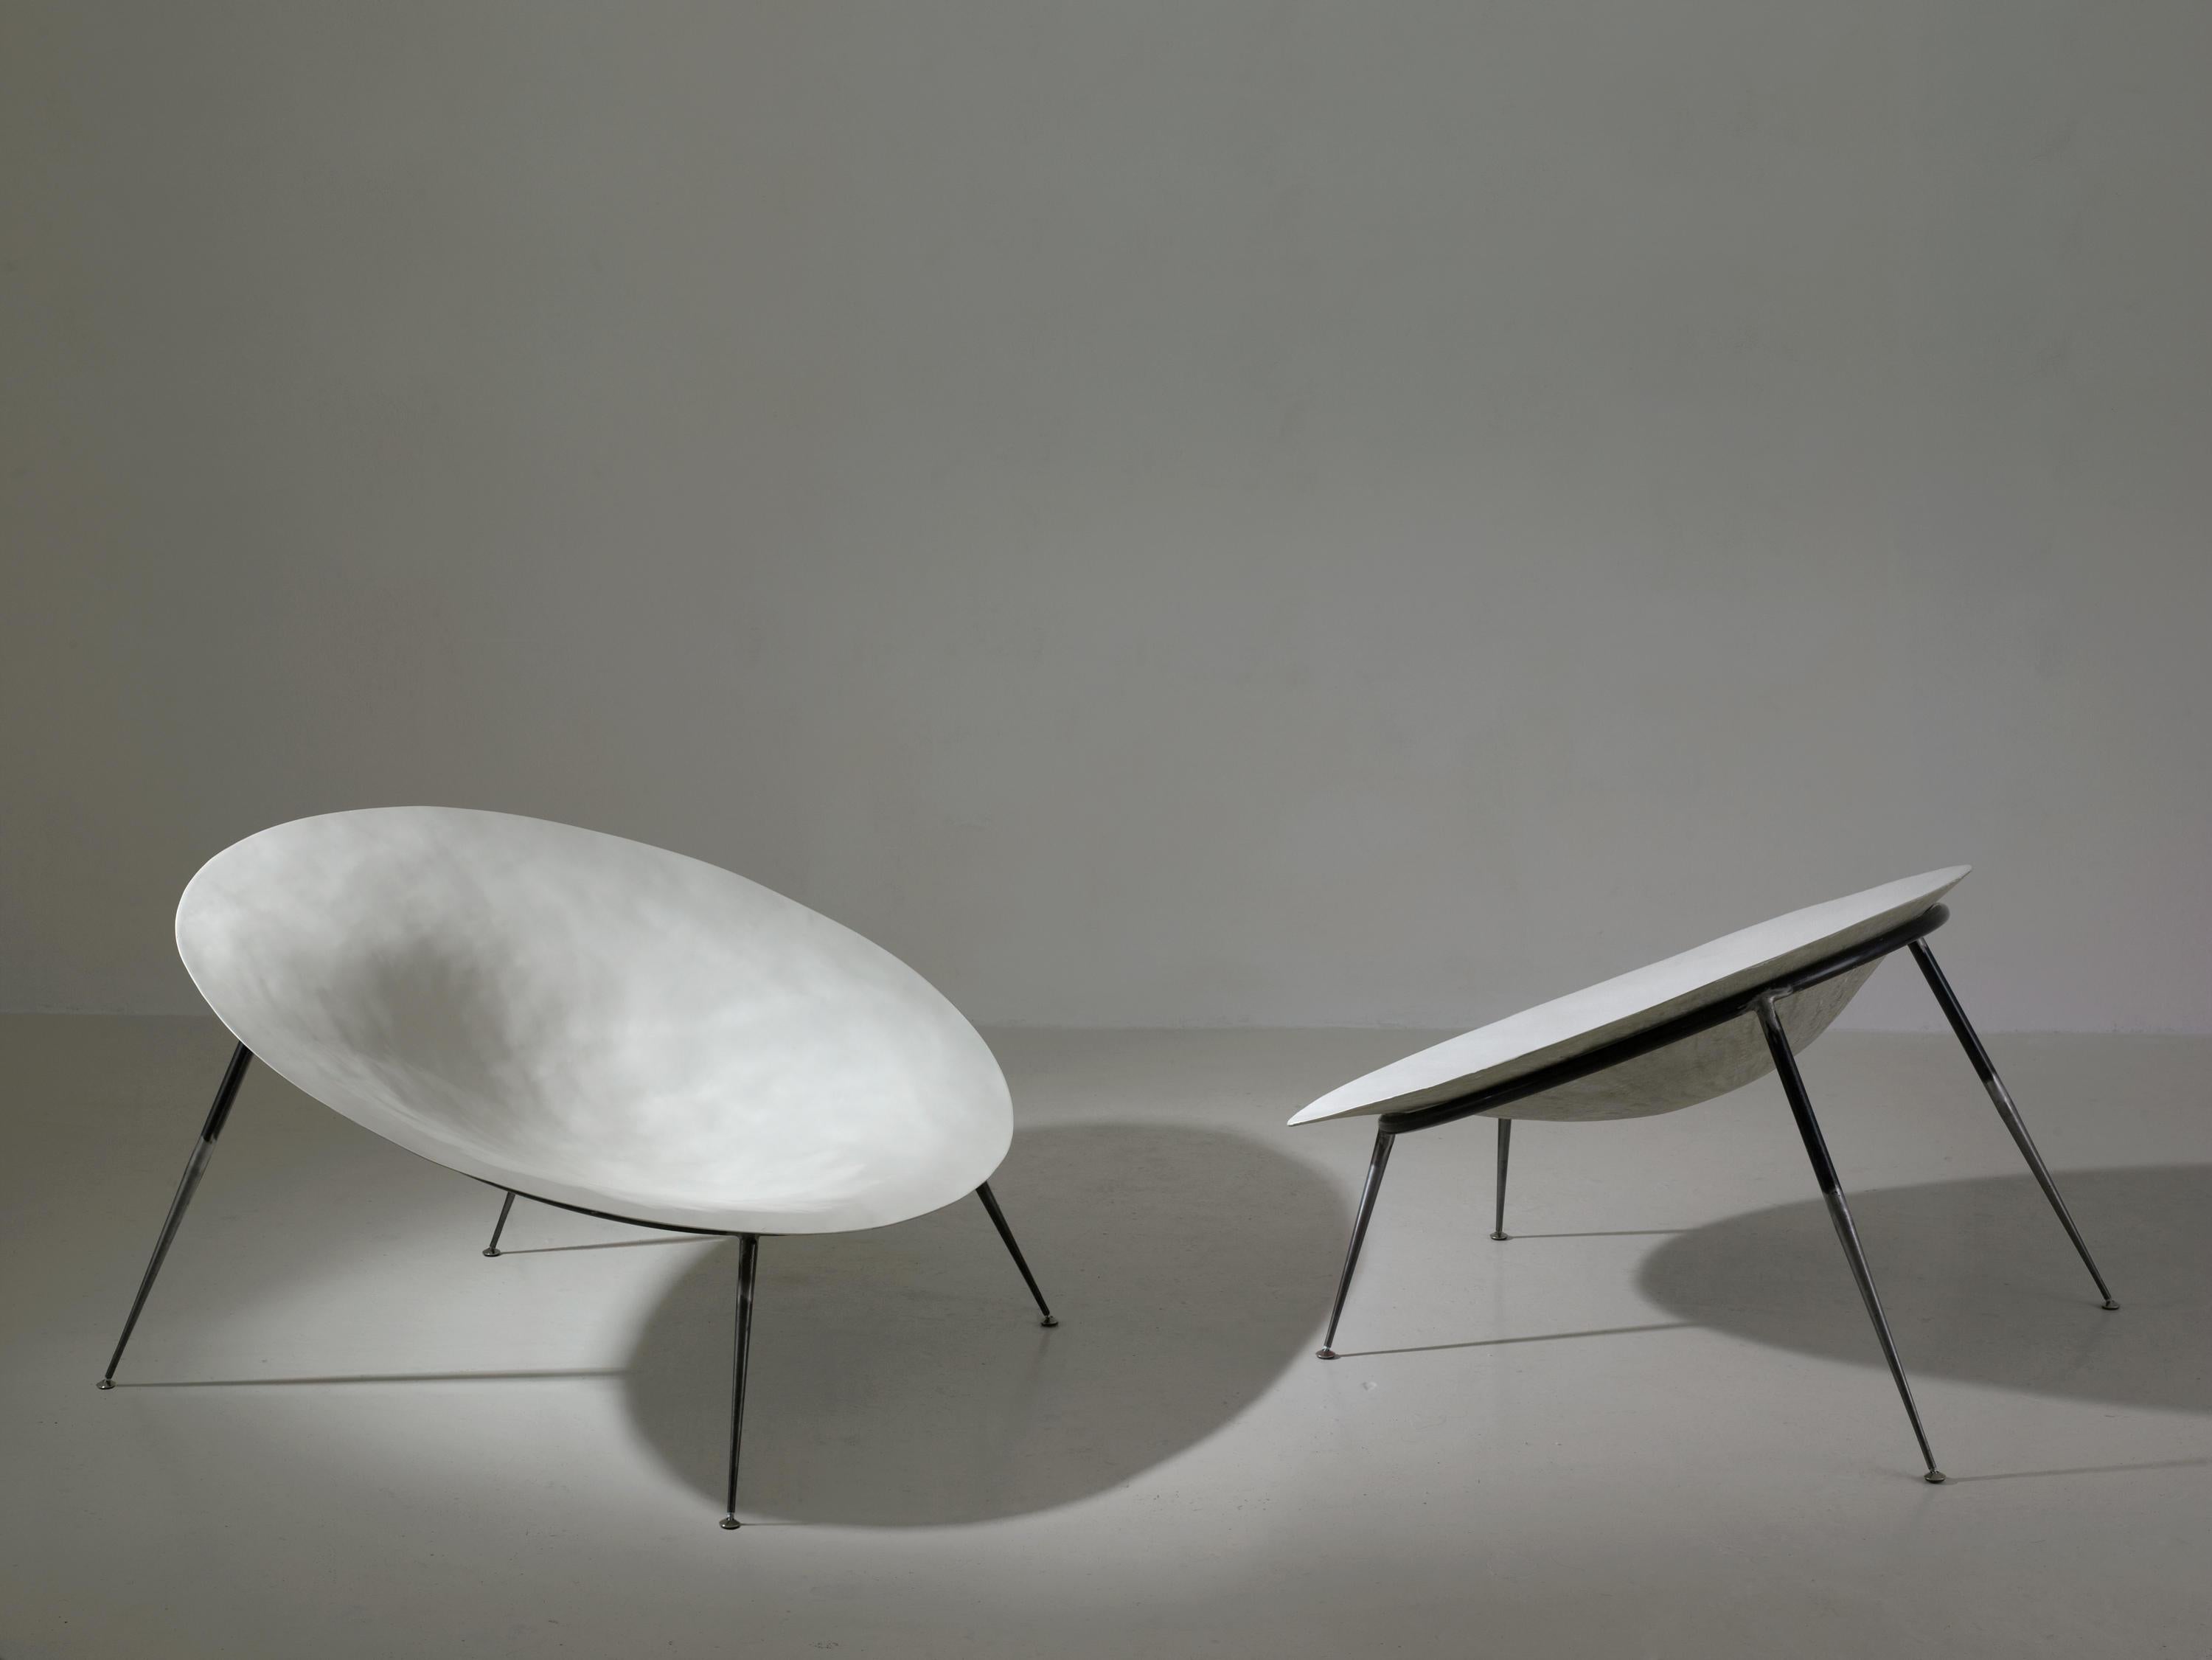 Italian and organic design pair of important (140 cm diameter) lounger armchair with fiberglass shell, metal feet and white mate lacquer! Outstanding and in excellent state (new items, never used).